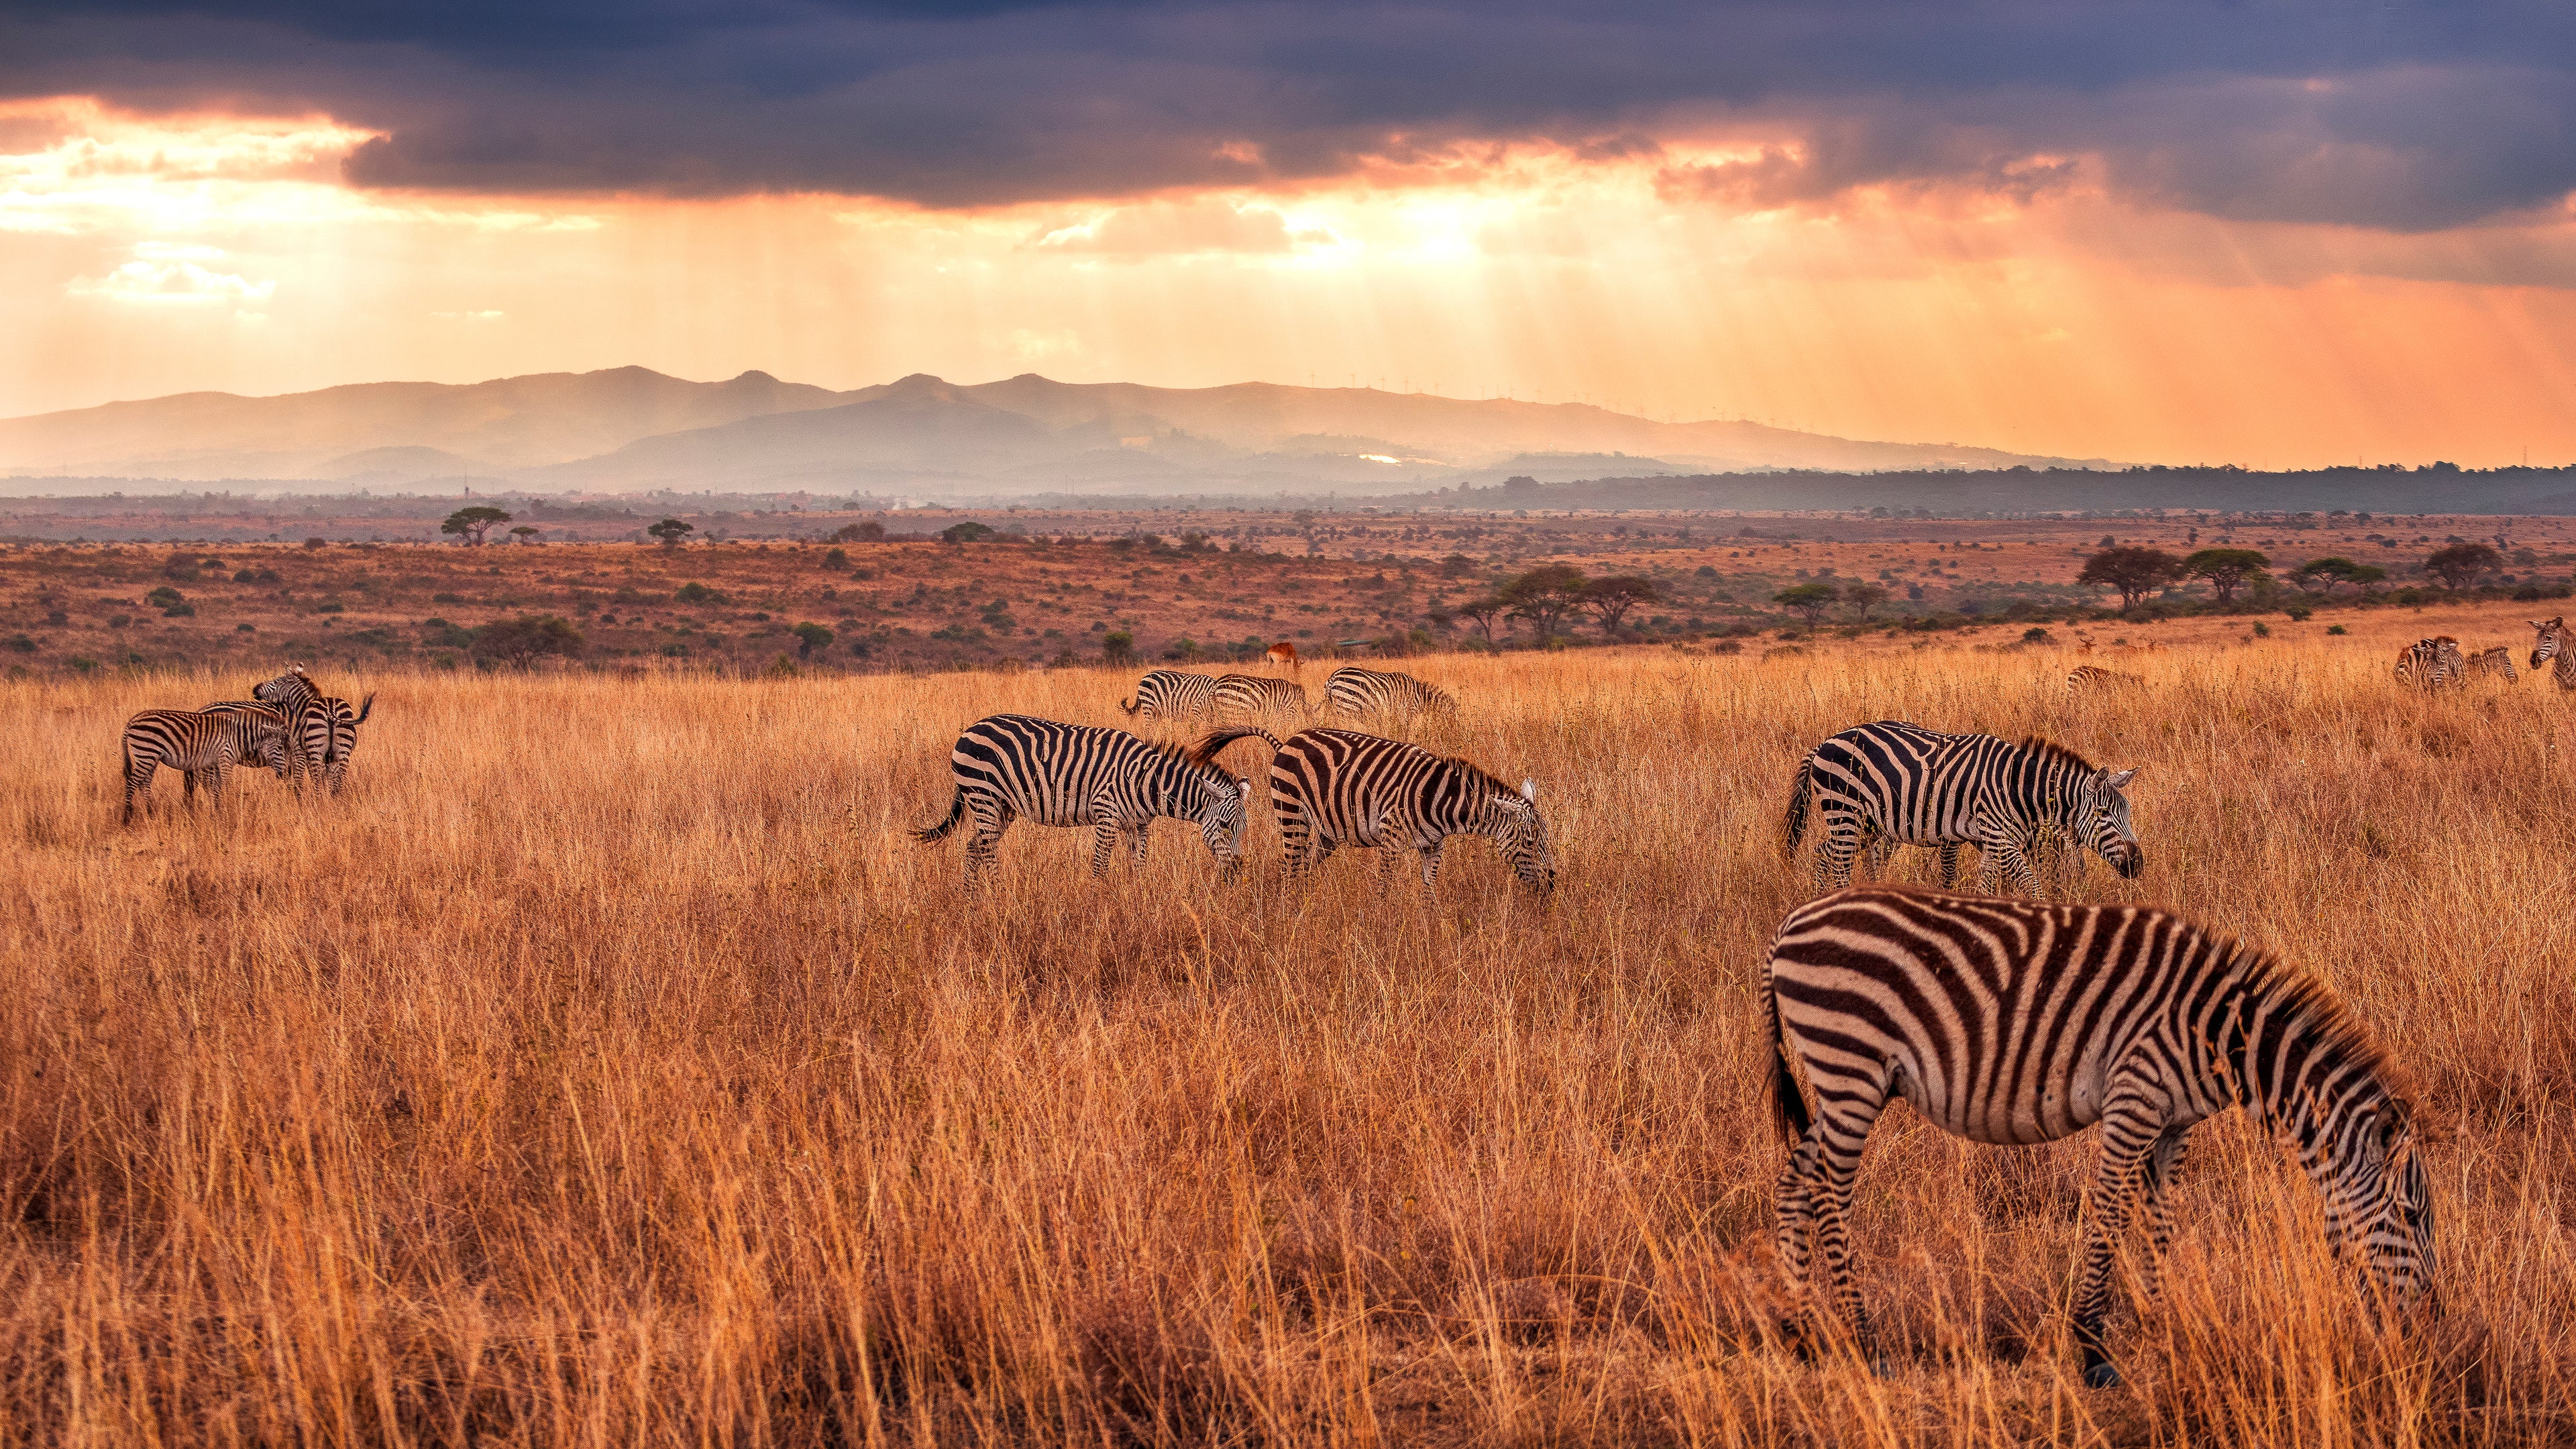 Scenic View Of Zebras Grazing In Field Against Sky During Sunset